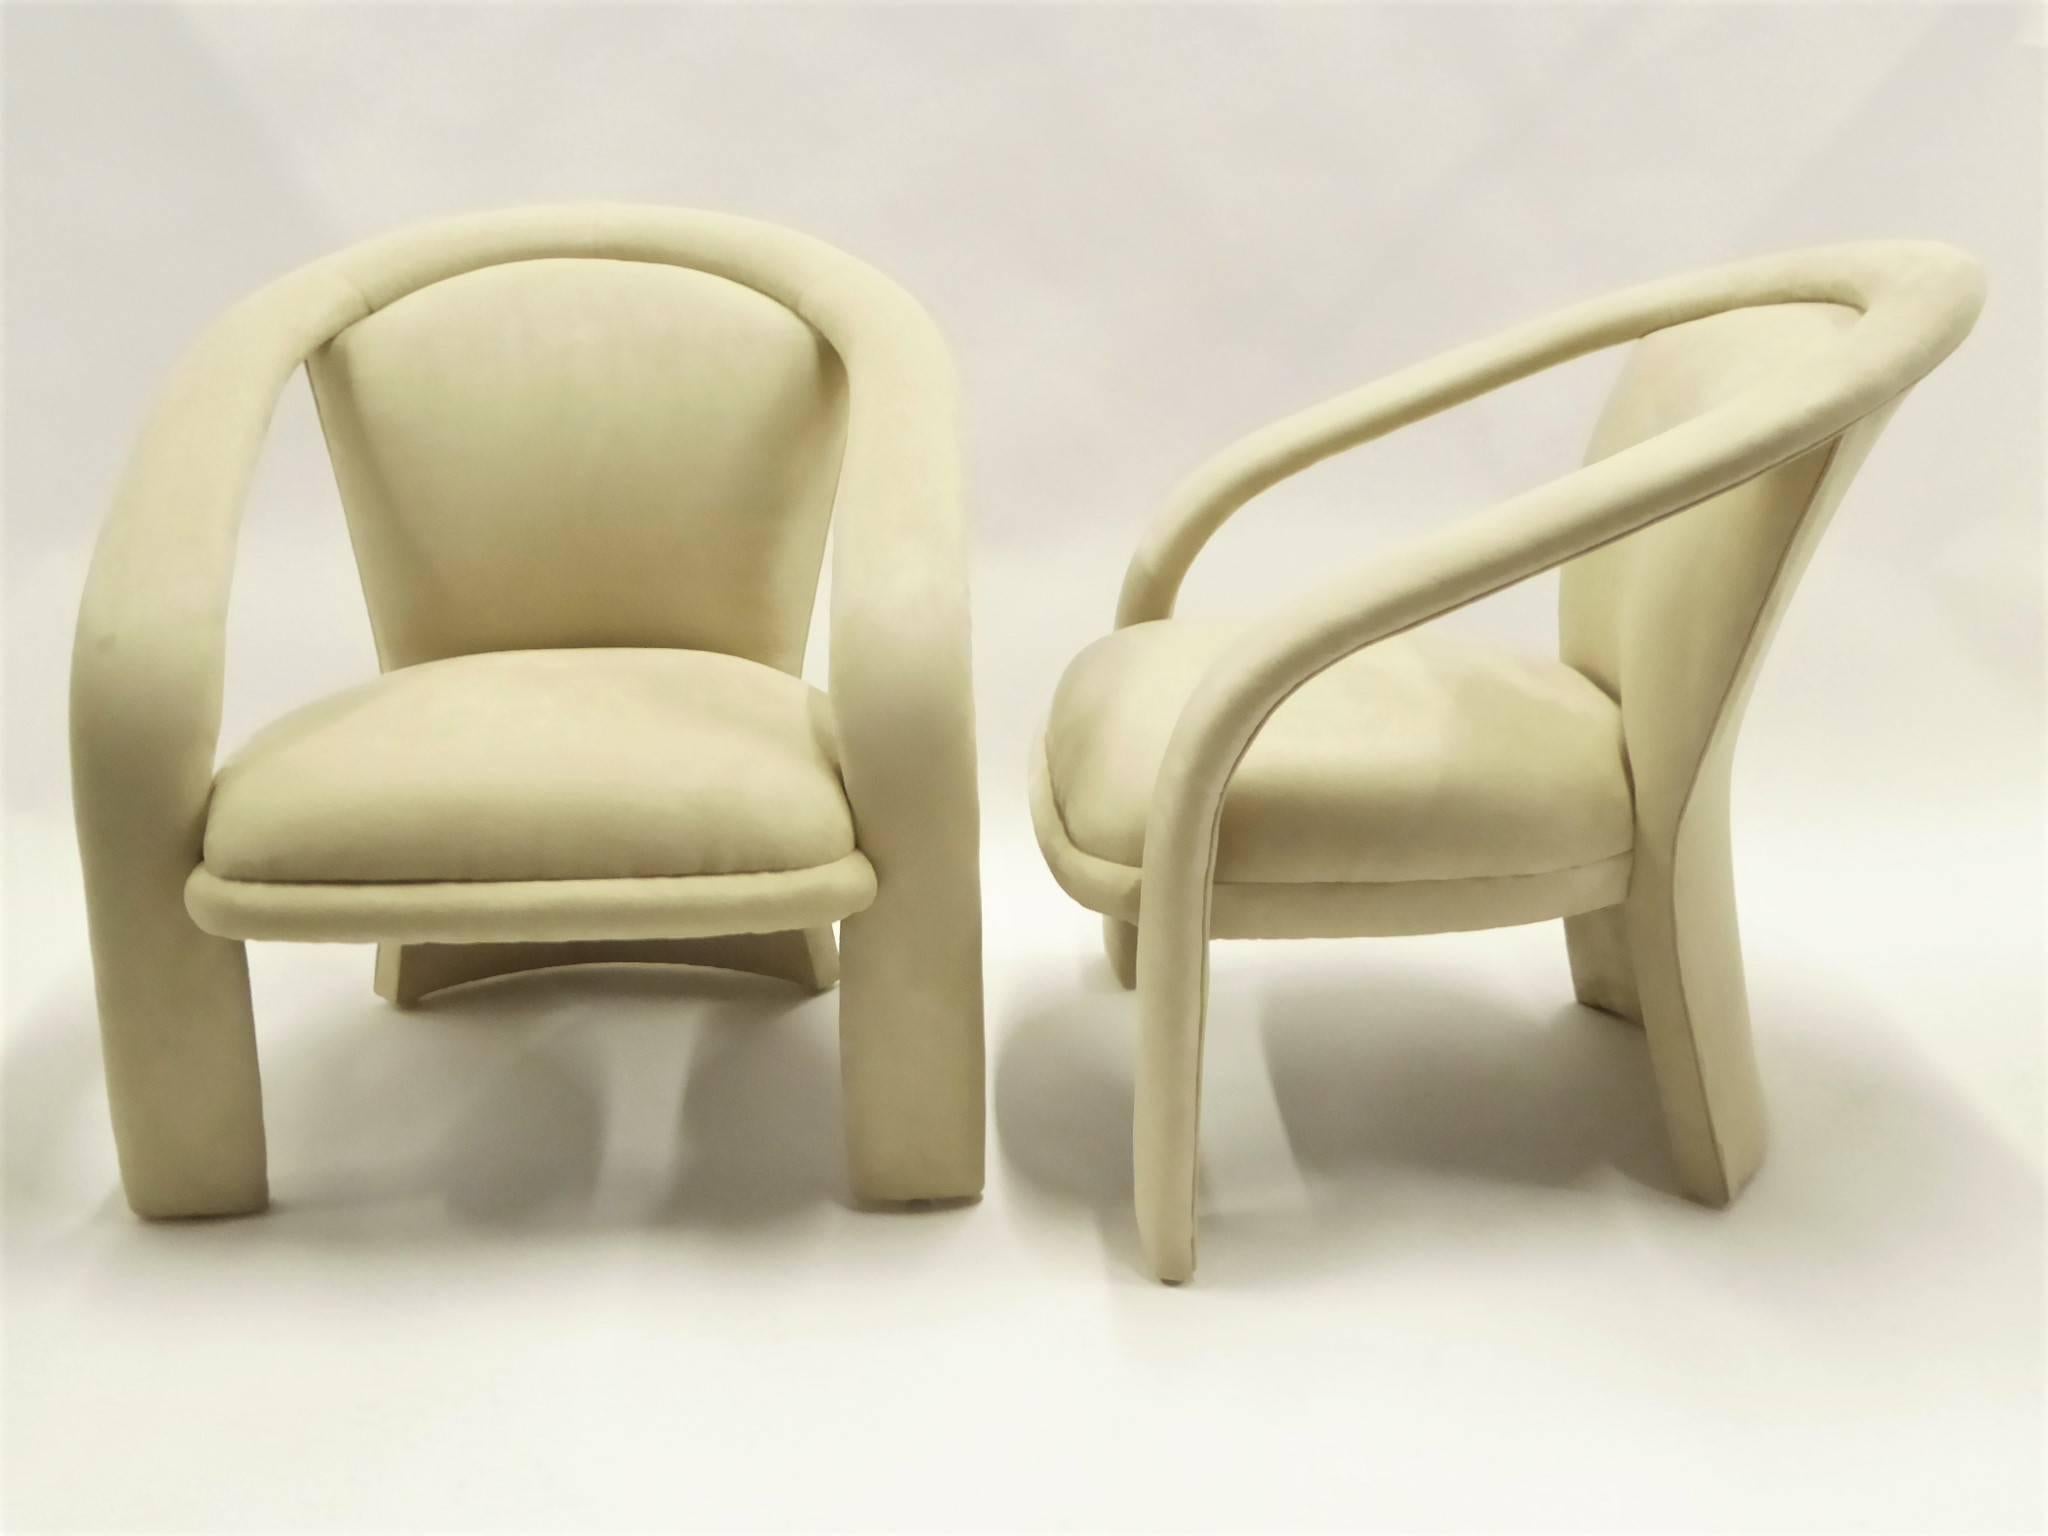 Sporting modern wrap around arms and a fan shaped back, this pair of lounge chairs by Carson's owes inspiration to Milo Baughman. This mid-1980s design newly upholstered in a cream Ultrasuede. Stunning, comfy and late Mid-Century Modern, Space